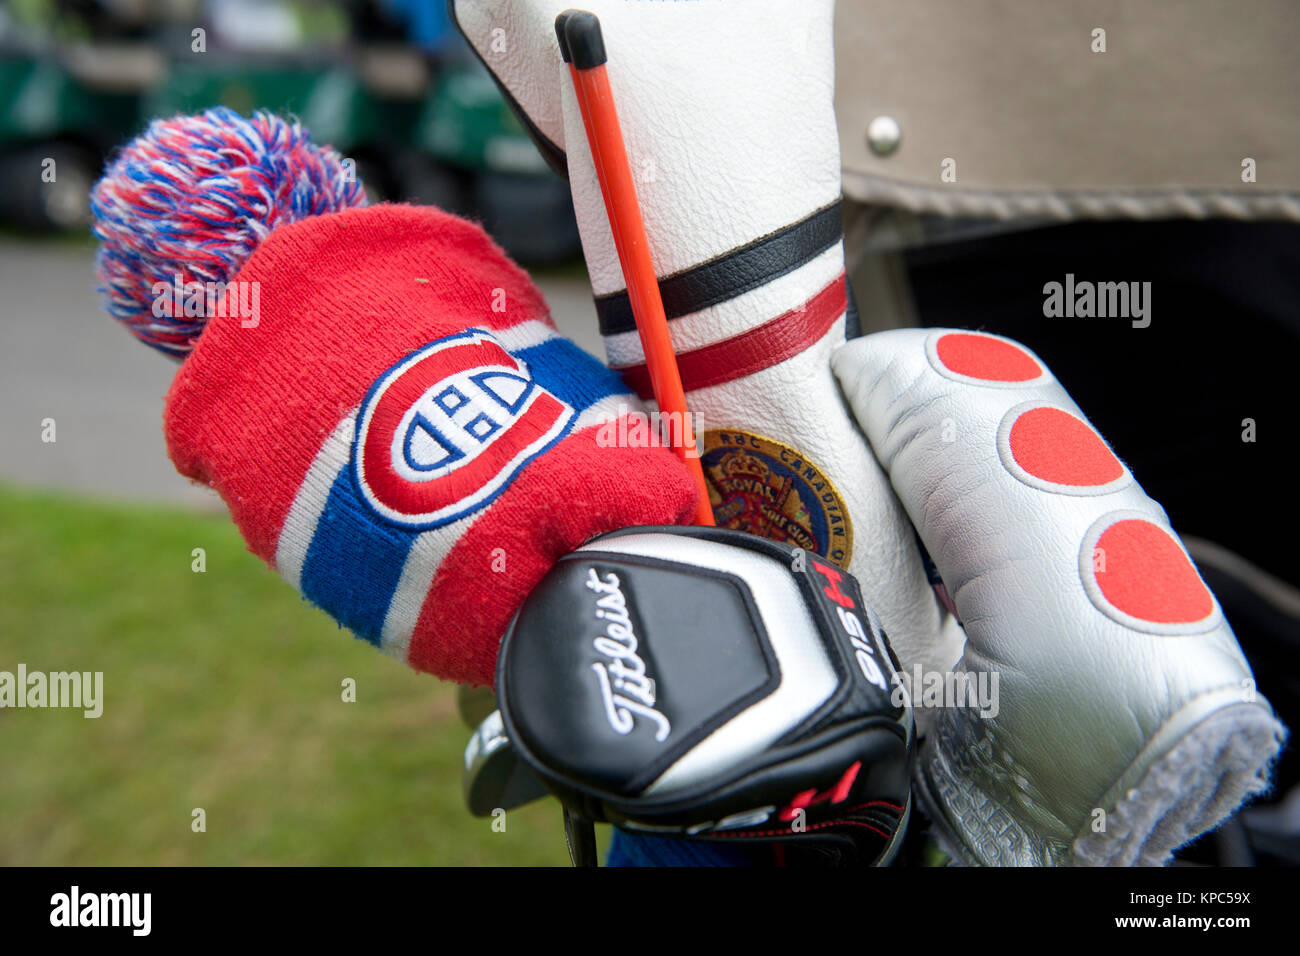 Montreal Canadiens (famous ice hockey team) golf club headcover. Stock Photo